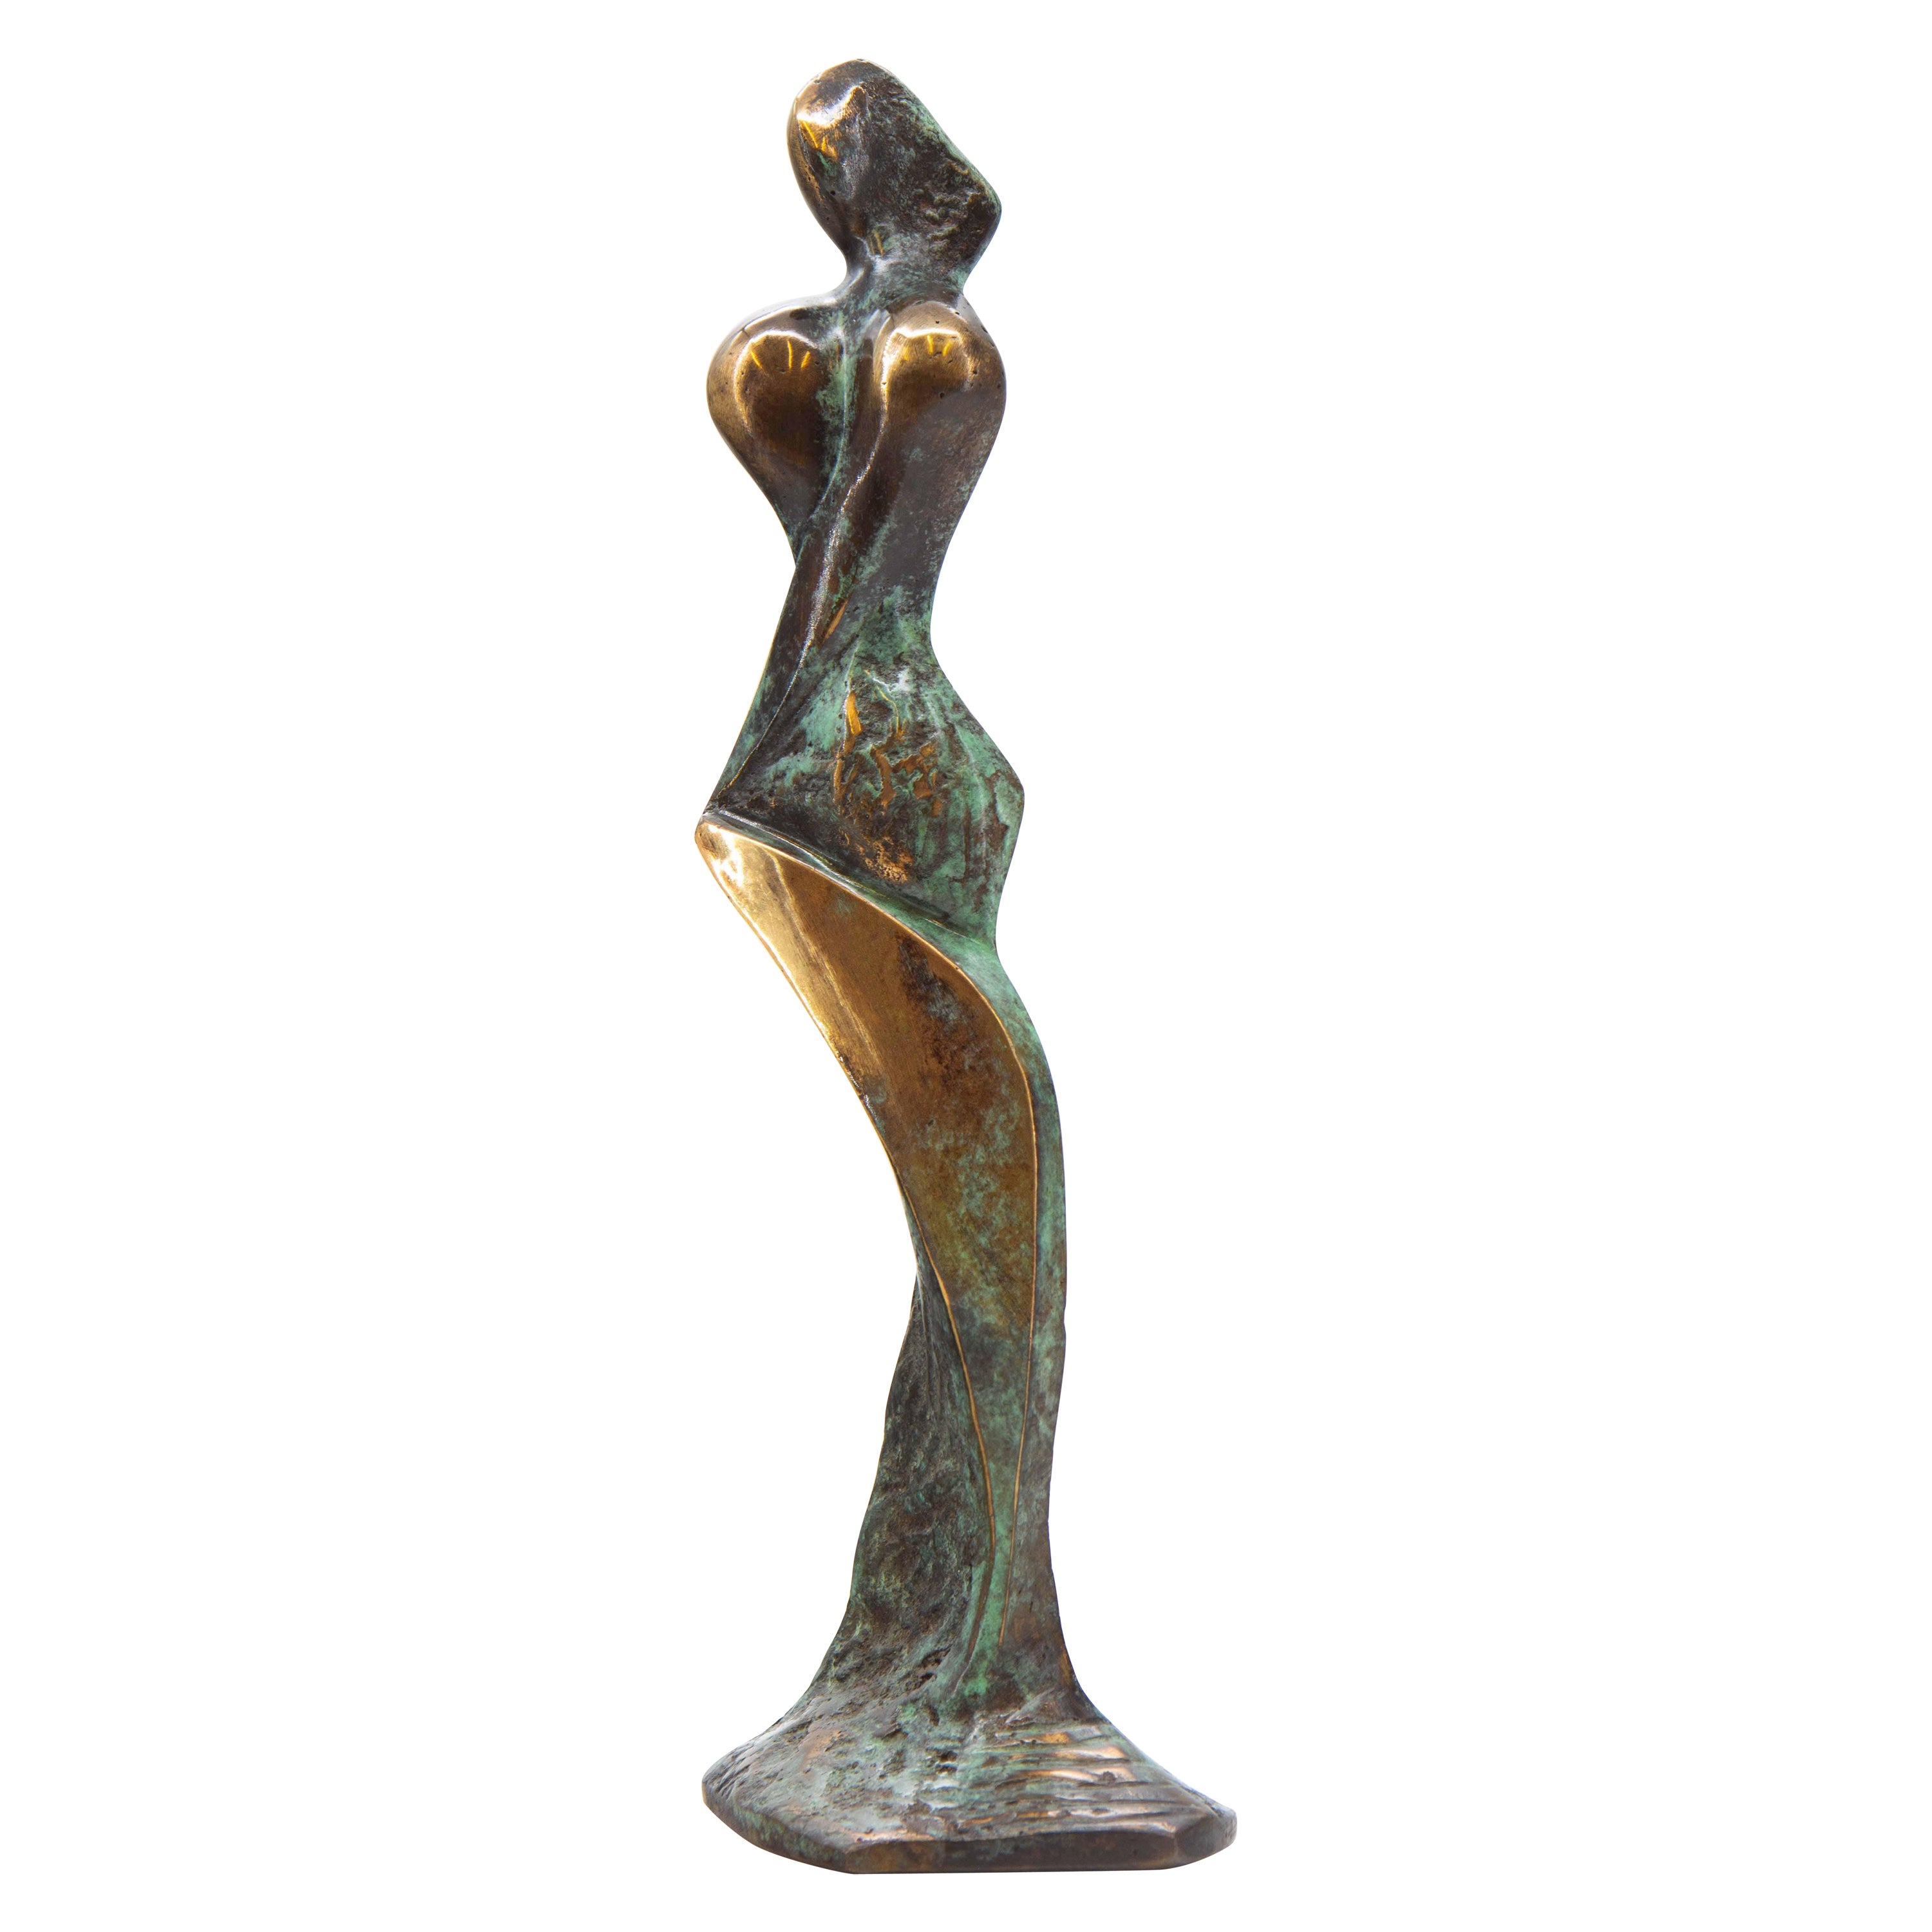 Contemporary Abstract Bronze of a Female Statuette by Stanislaw Wysocki